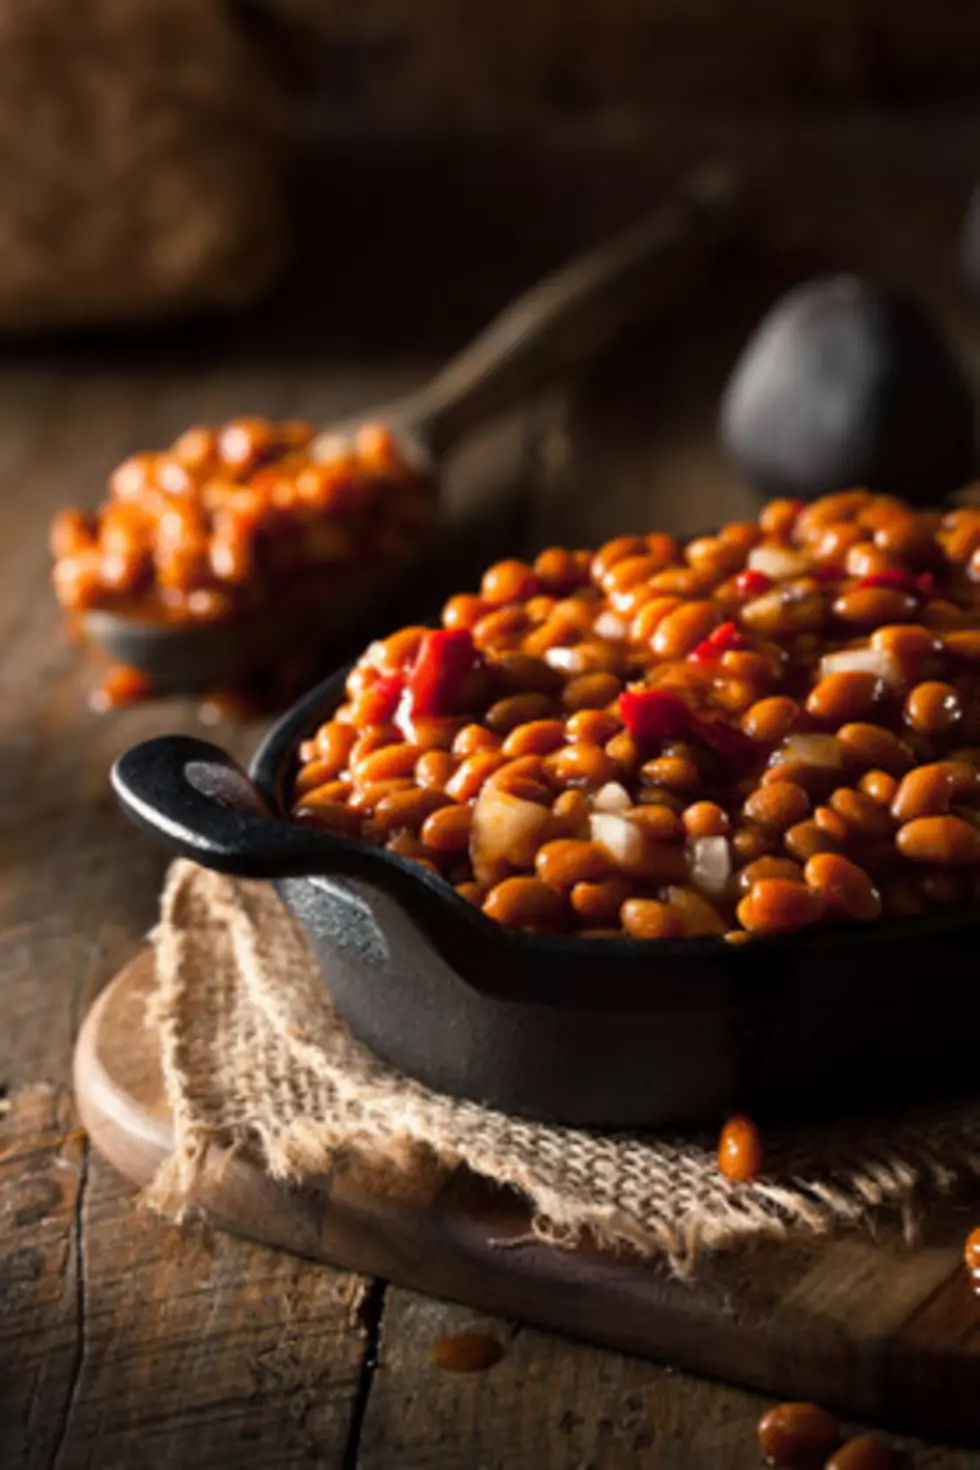 The baked beans diet